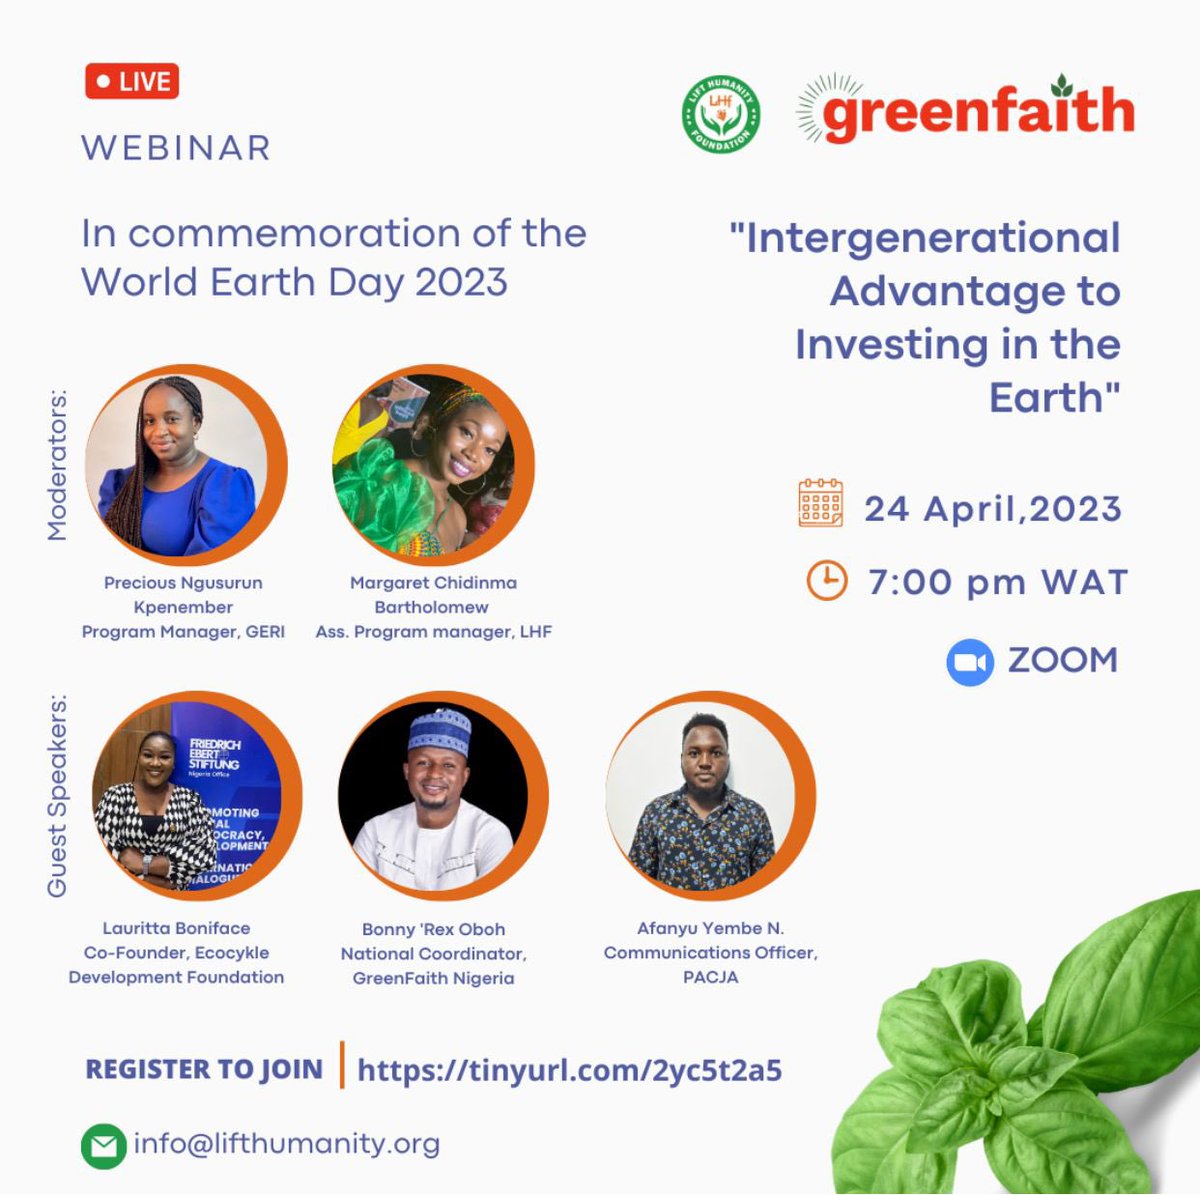 Remember to join in the Webinar
In commemoration of the World Earth Day 2023
 
Topic: Intergenerational Advantage  to Investing in the Earth

Date: Apr 24, 2023
Time: 7:00pm Africa/Lagos
 
Join Zoom Meeting 
Link: tinyurl.com/2yc5t2a5

#WorldEarthDay